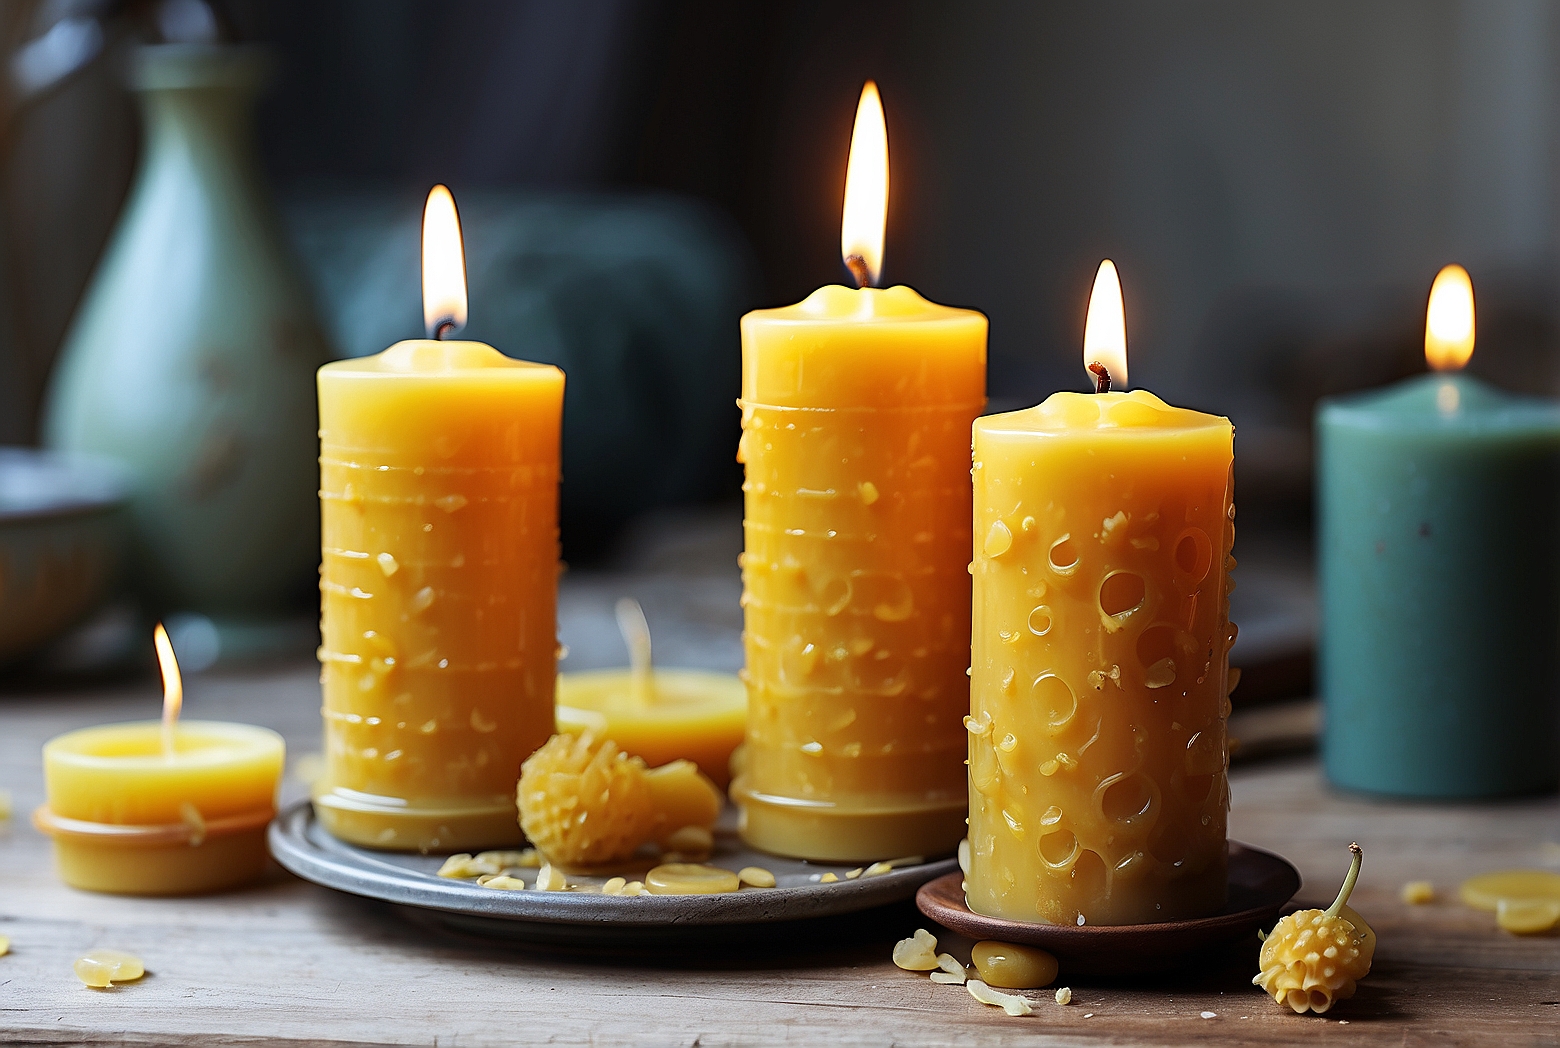 How to Make Beeswax Candles That Last Longer